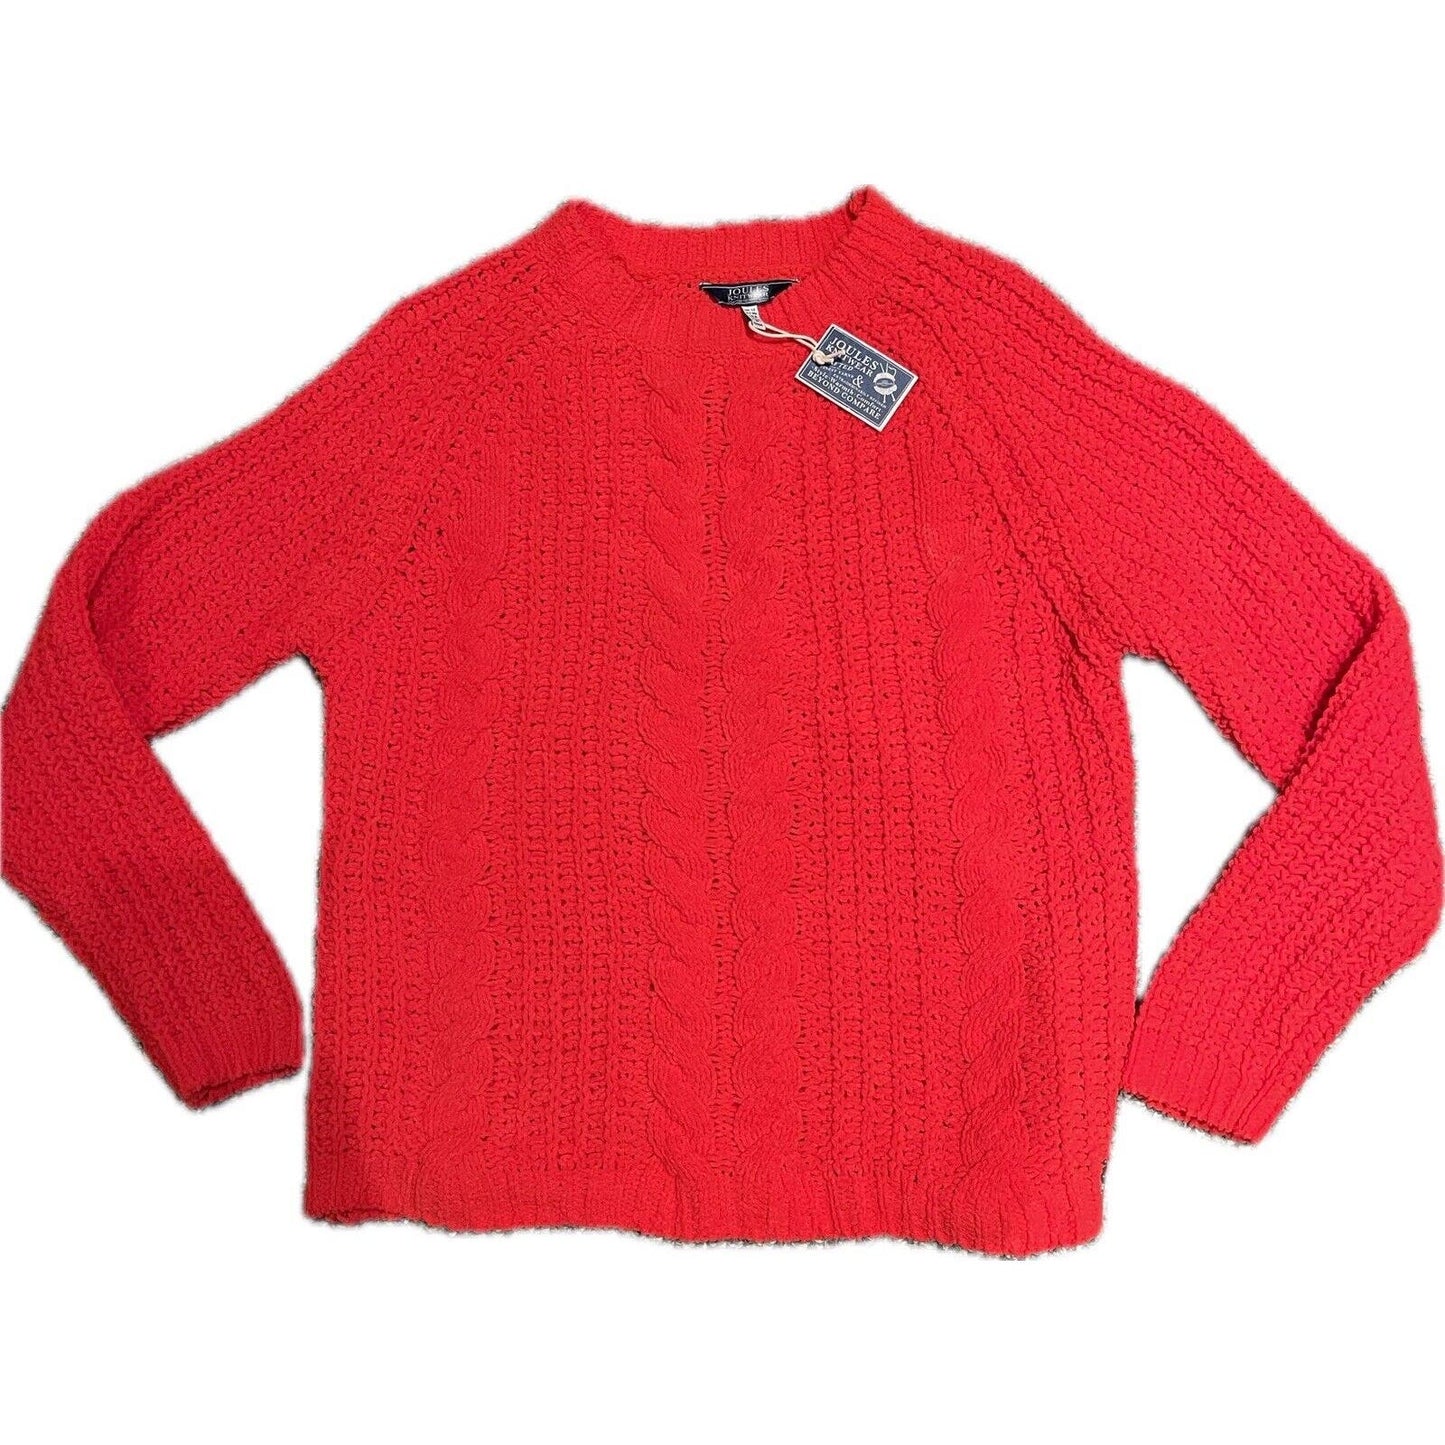 NWT Joules Knitwear Red Cable Knit Women’s Sweater Crew Neck Size 8 $62 MSRP